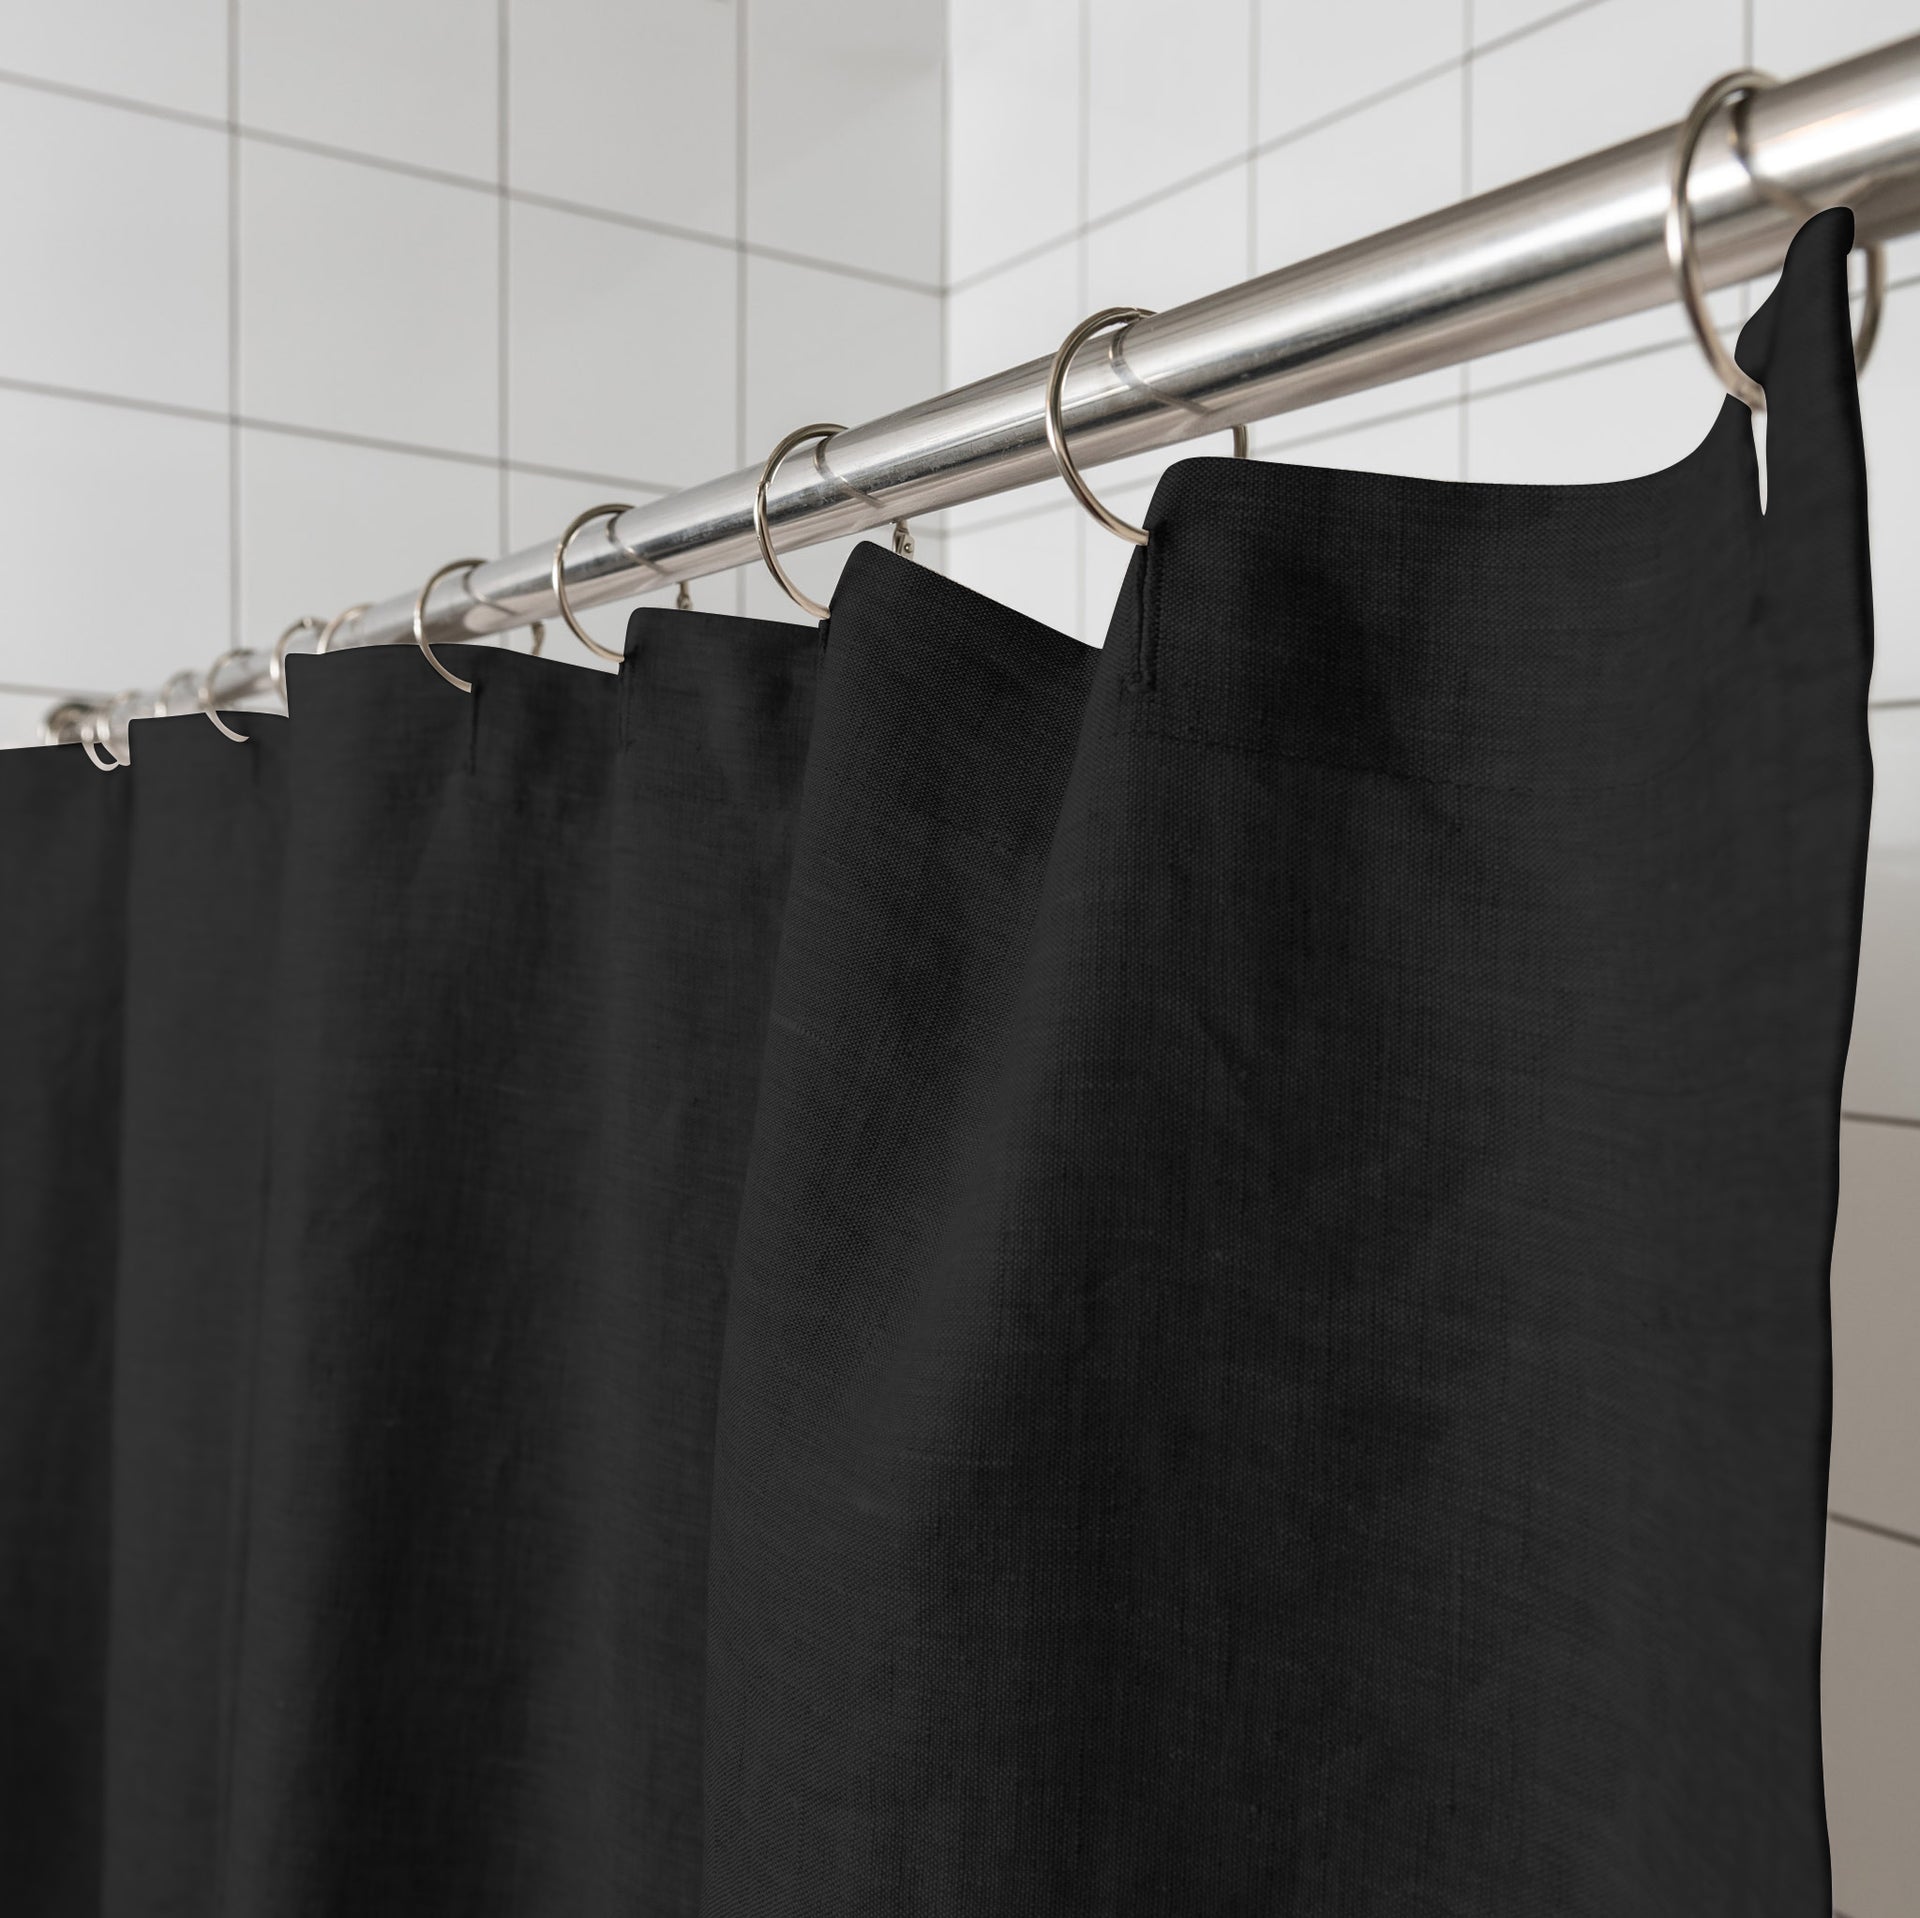 Linen Shower Curtain in Black Color